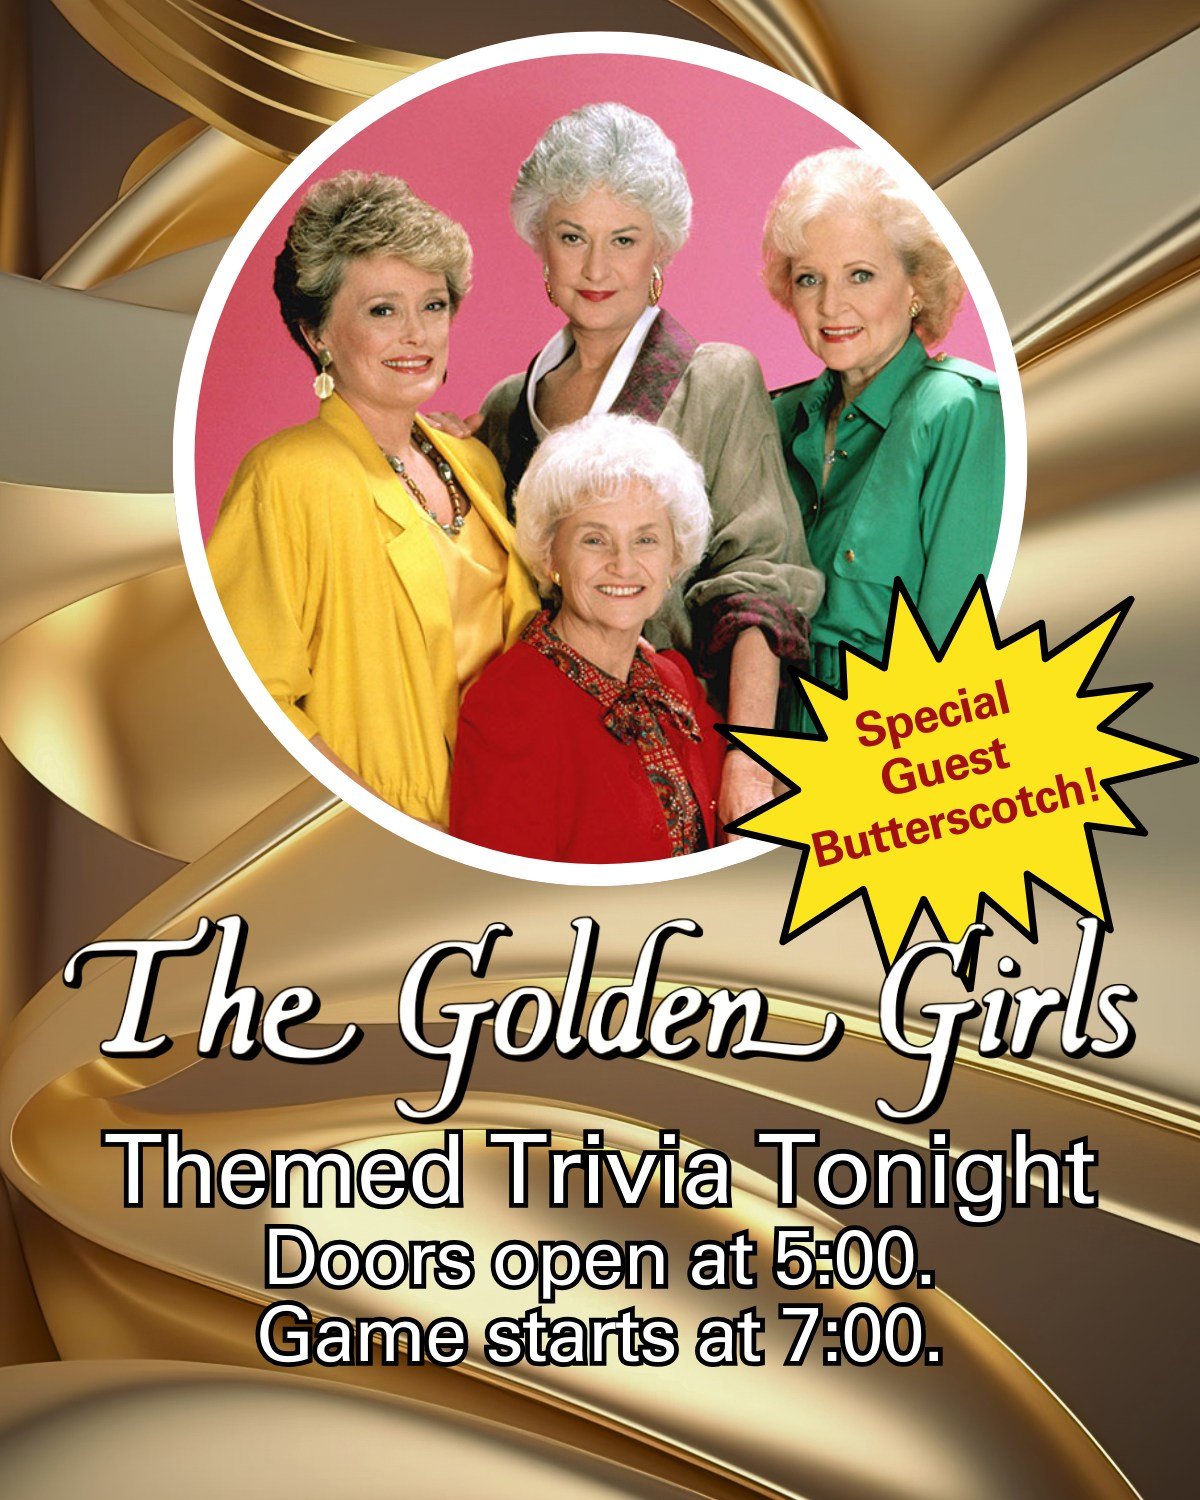 The Golden Girls Trivia is tonight! 
Doors open at 5, and games start at 7. We've brewed up a special mead for tonight, Butterscotch! Grab the early bird special for dinner, and head on over!